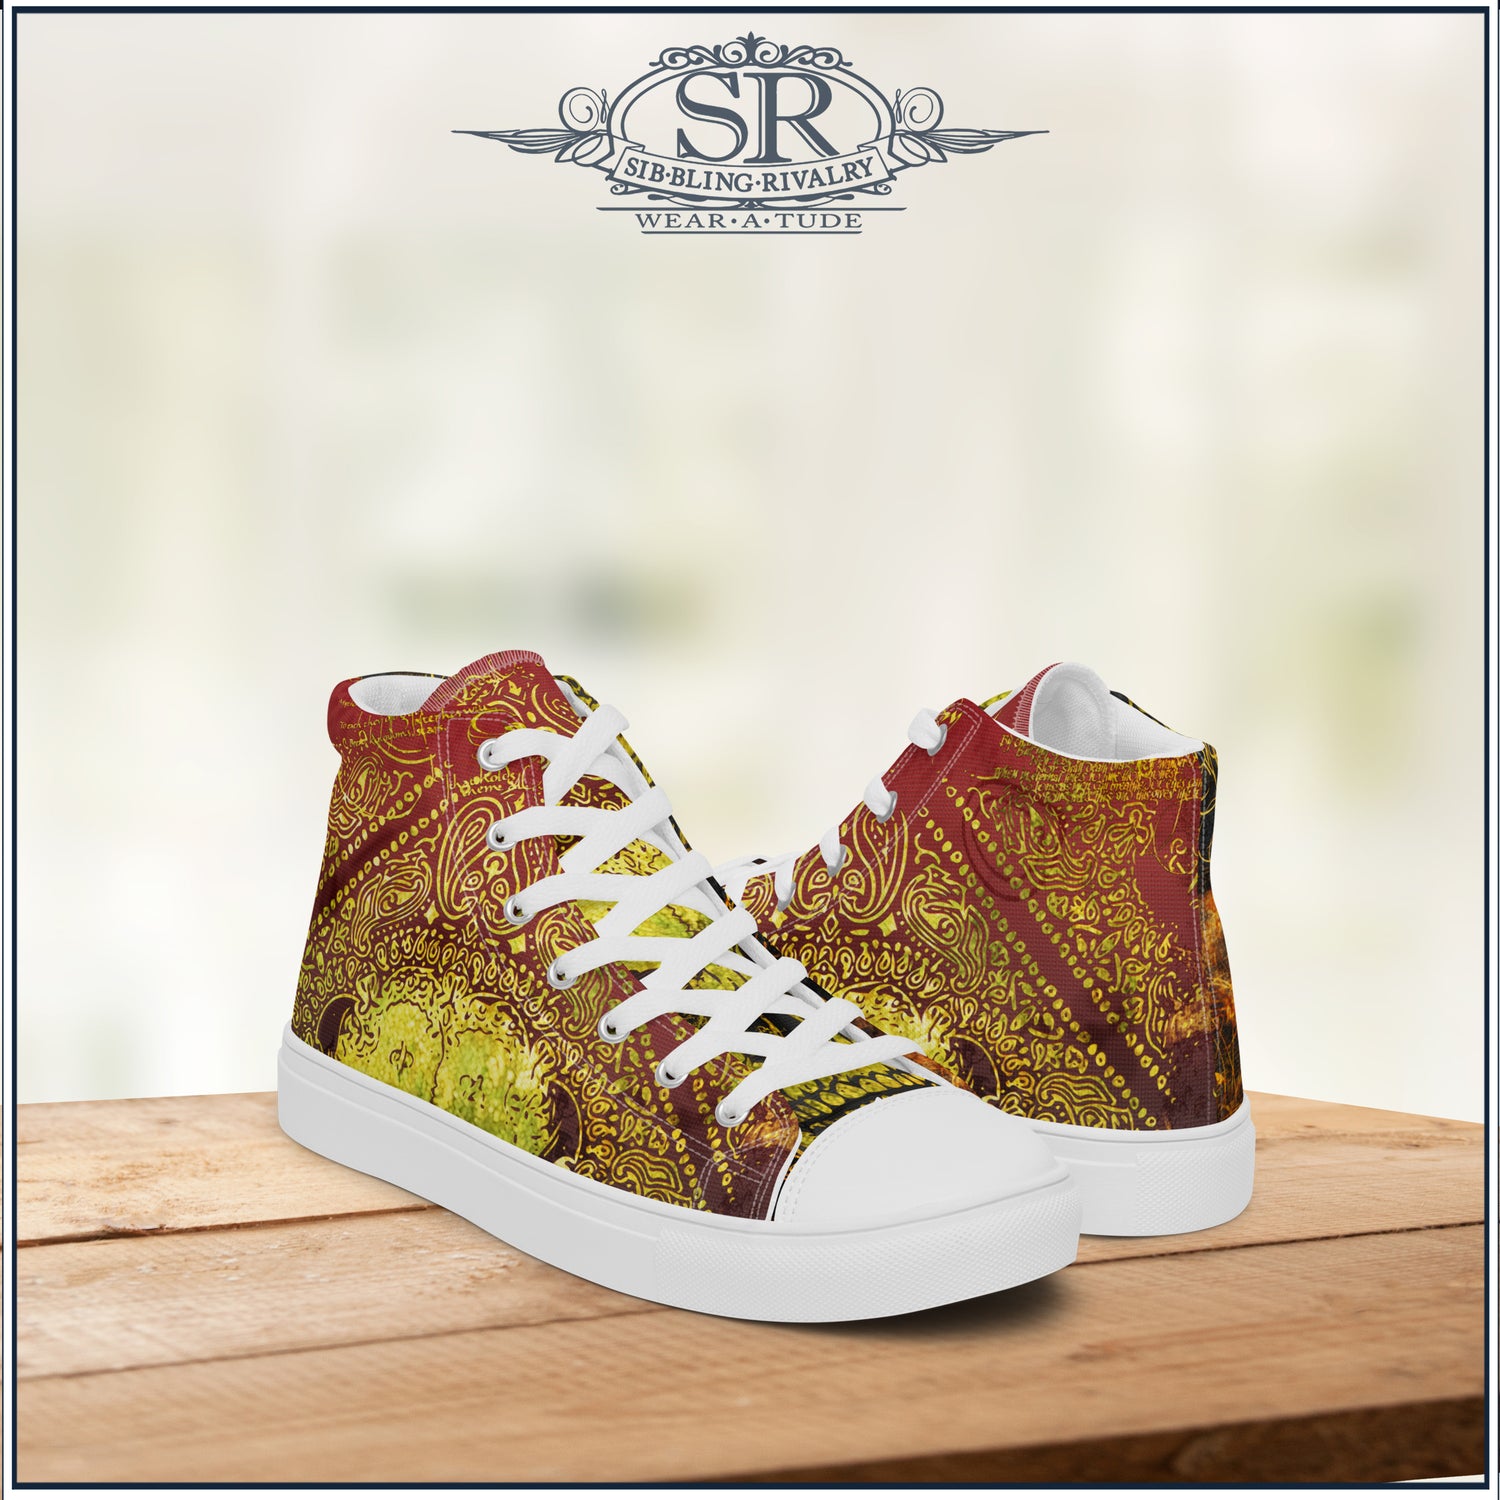 Rusted Reaper mens high top shoes with a vintage grunge feel for the Rock Star. Bold footwear with a distinctive urban style. Alternative foot wear